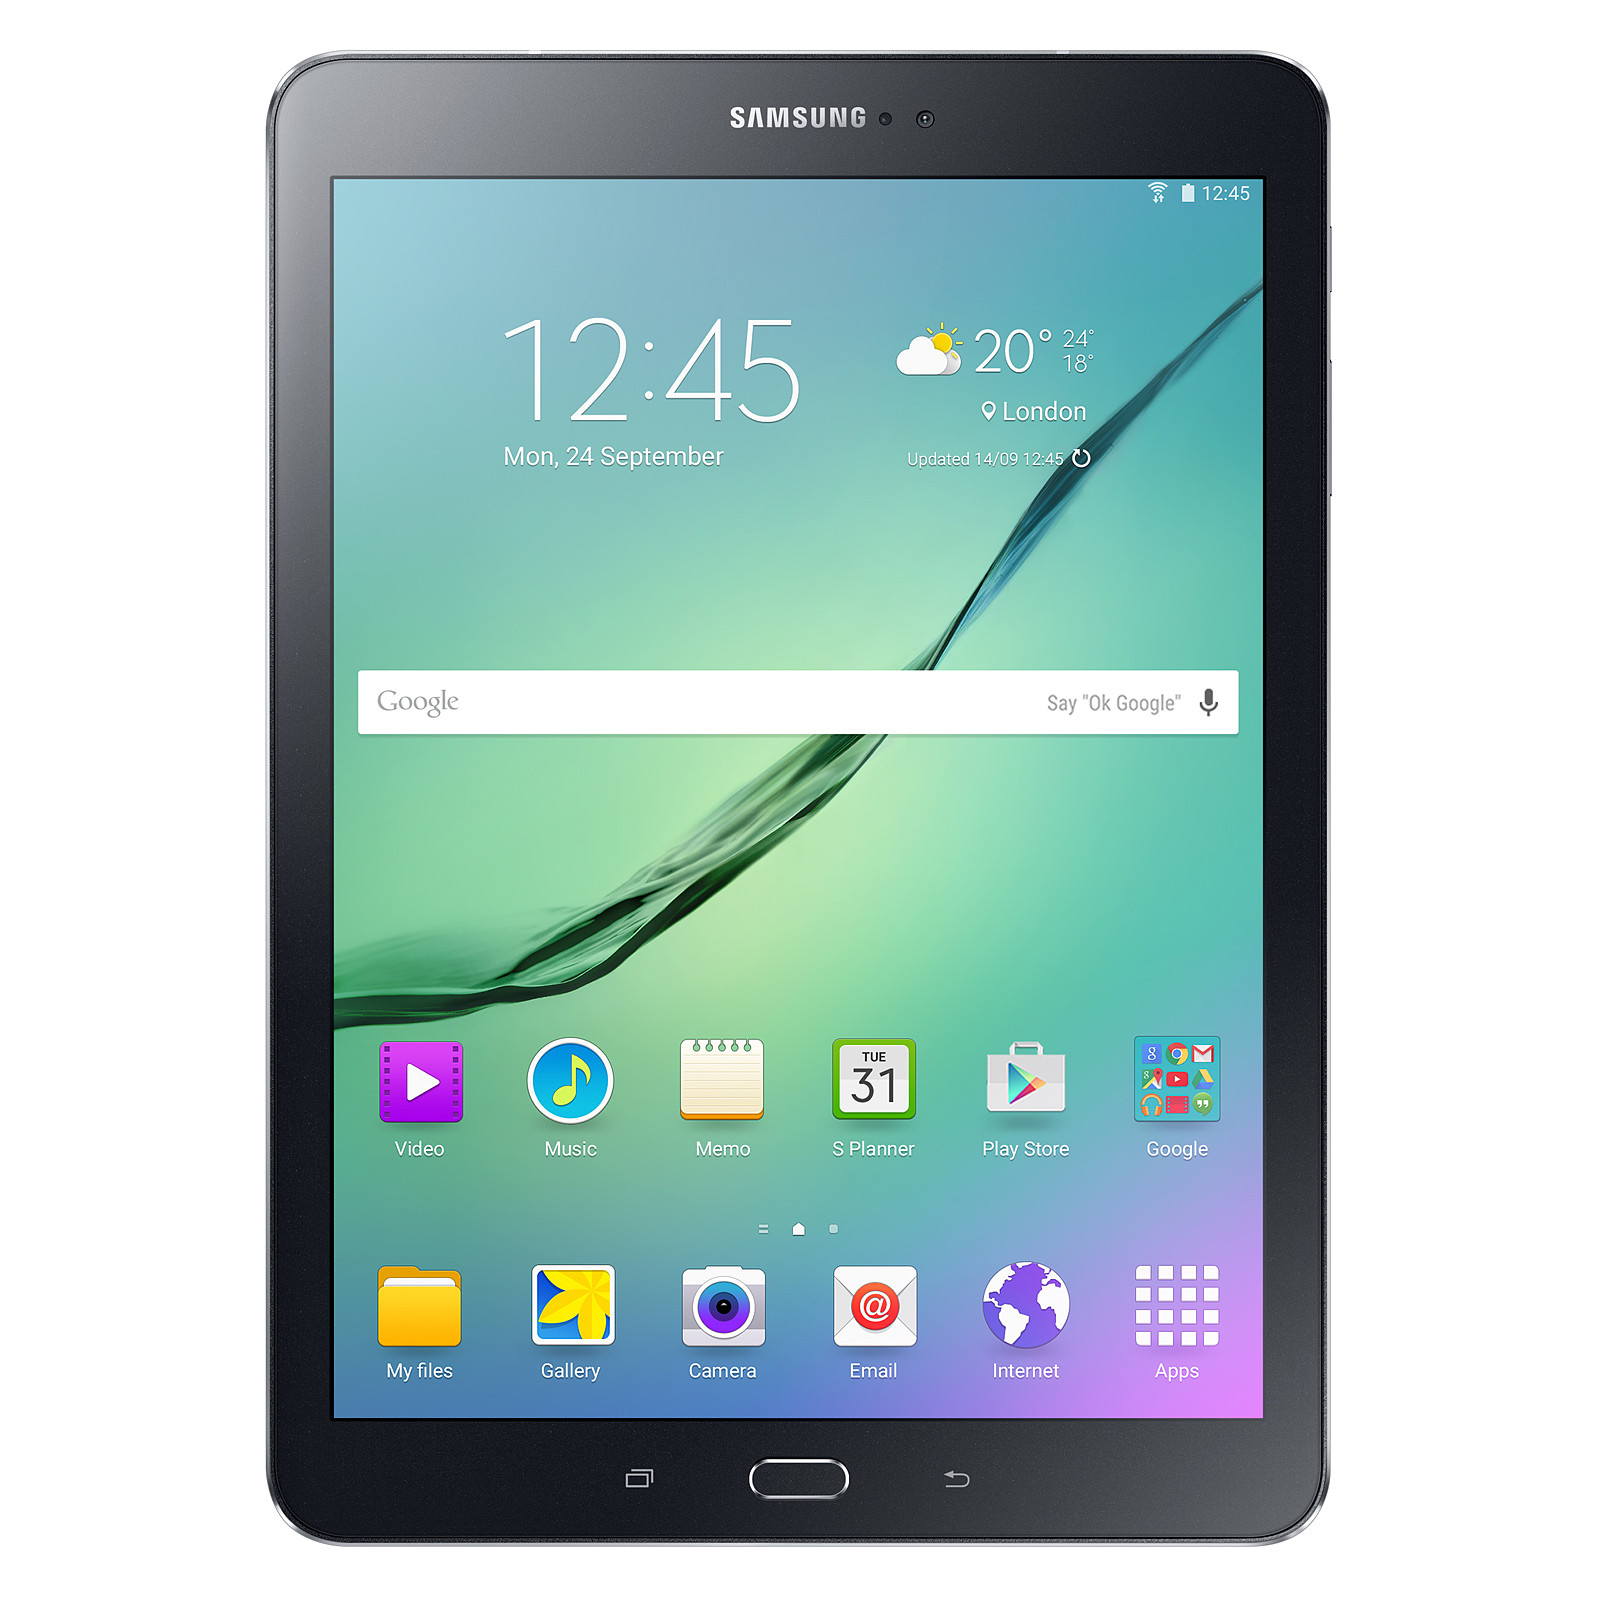 Samsung Galaxy Tab S2 9.7" Value Edition SM-T813 32 Go Noir · Reconditionne - Tablette tactile Samsung